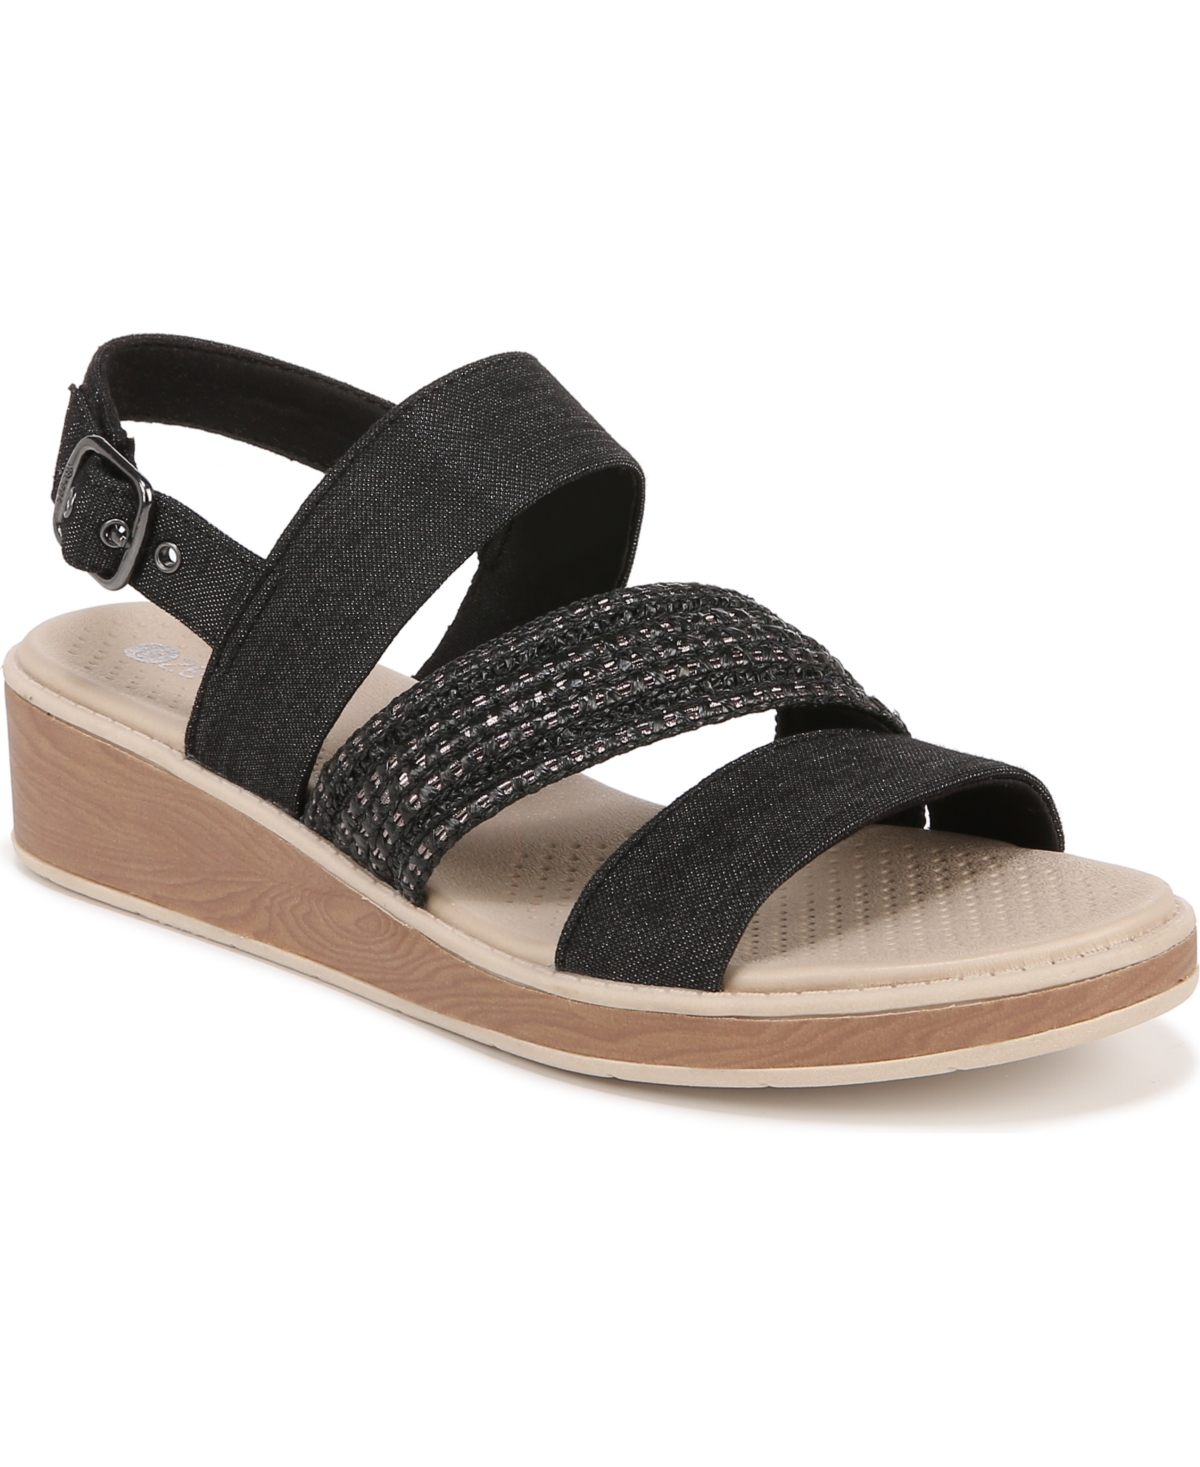 Bravo Washable Strappy Sandals - Black Fabric/Faux Leather